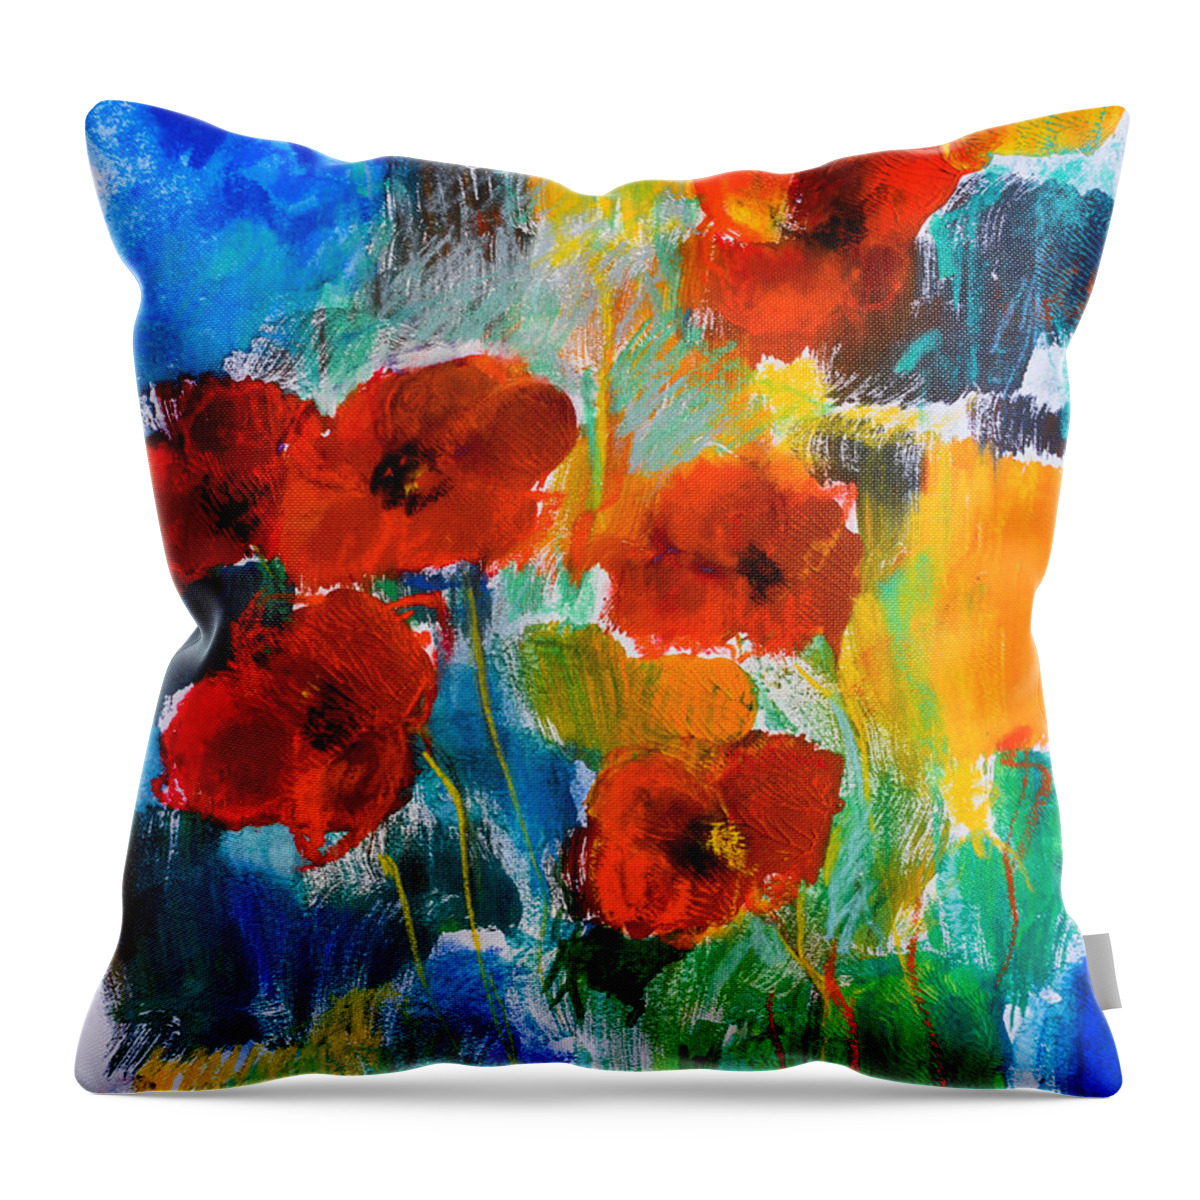 Poppies Throw Pillow featuring the painting Wild Poppies by Elise Palmigiani